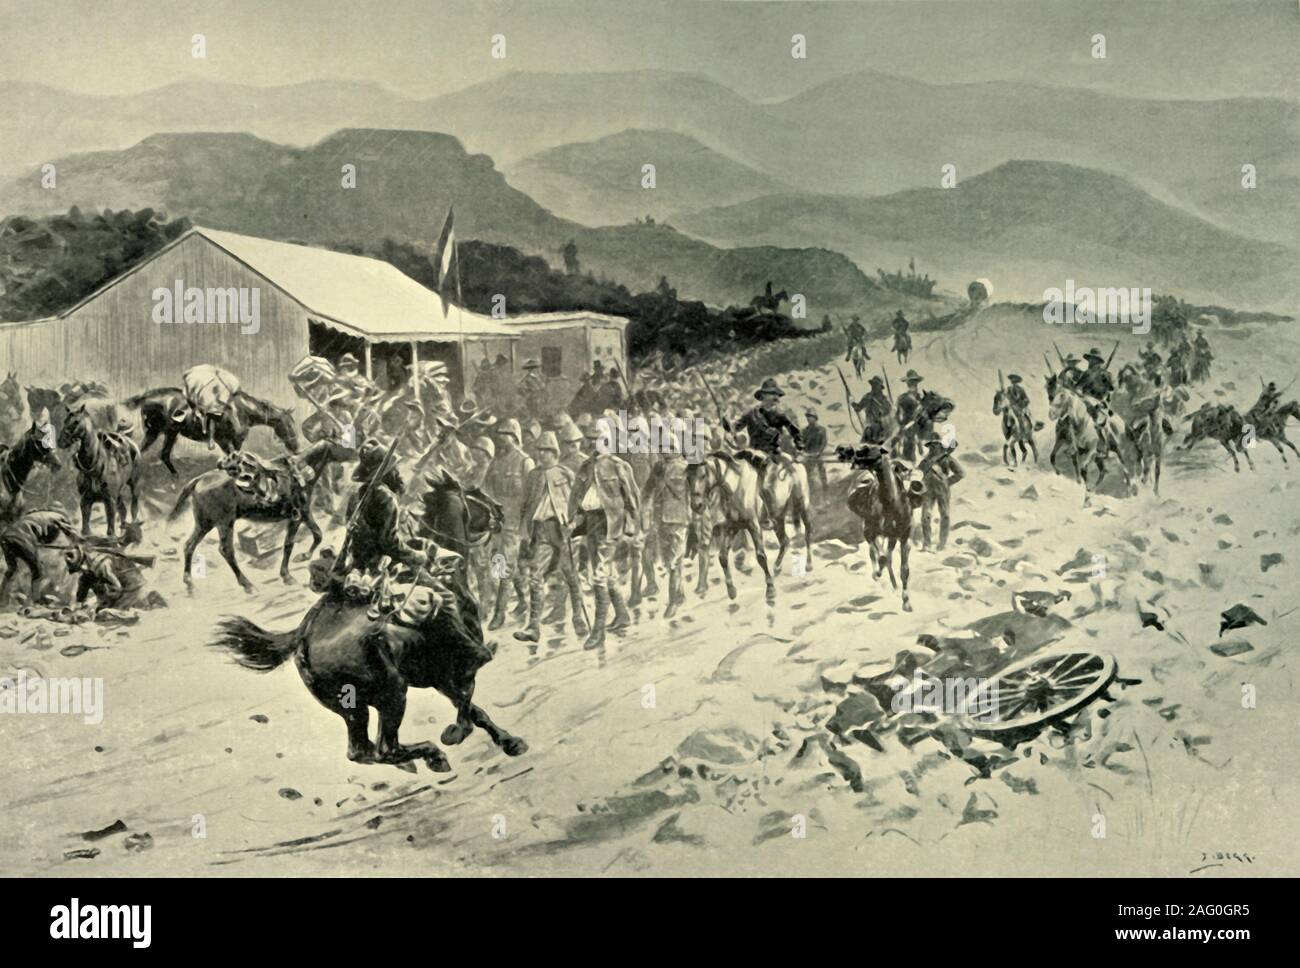 'British Prisoners on Their Wat to Pretoria: The First Halt', 1901. The Boers transport British prisoners to a prison camp in Pretoria, South Africa, during the second Boer War. From &quot;South Africa and the Transvaal War, Vol. V&quot;, by Louis Creswicke. [T. C. &amp; E. C. Jack, Edinburgh, 1901] Stock Photo